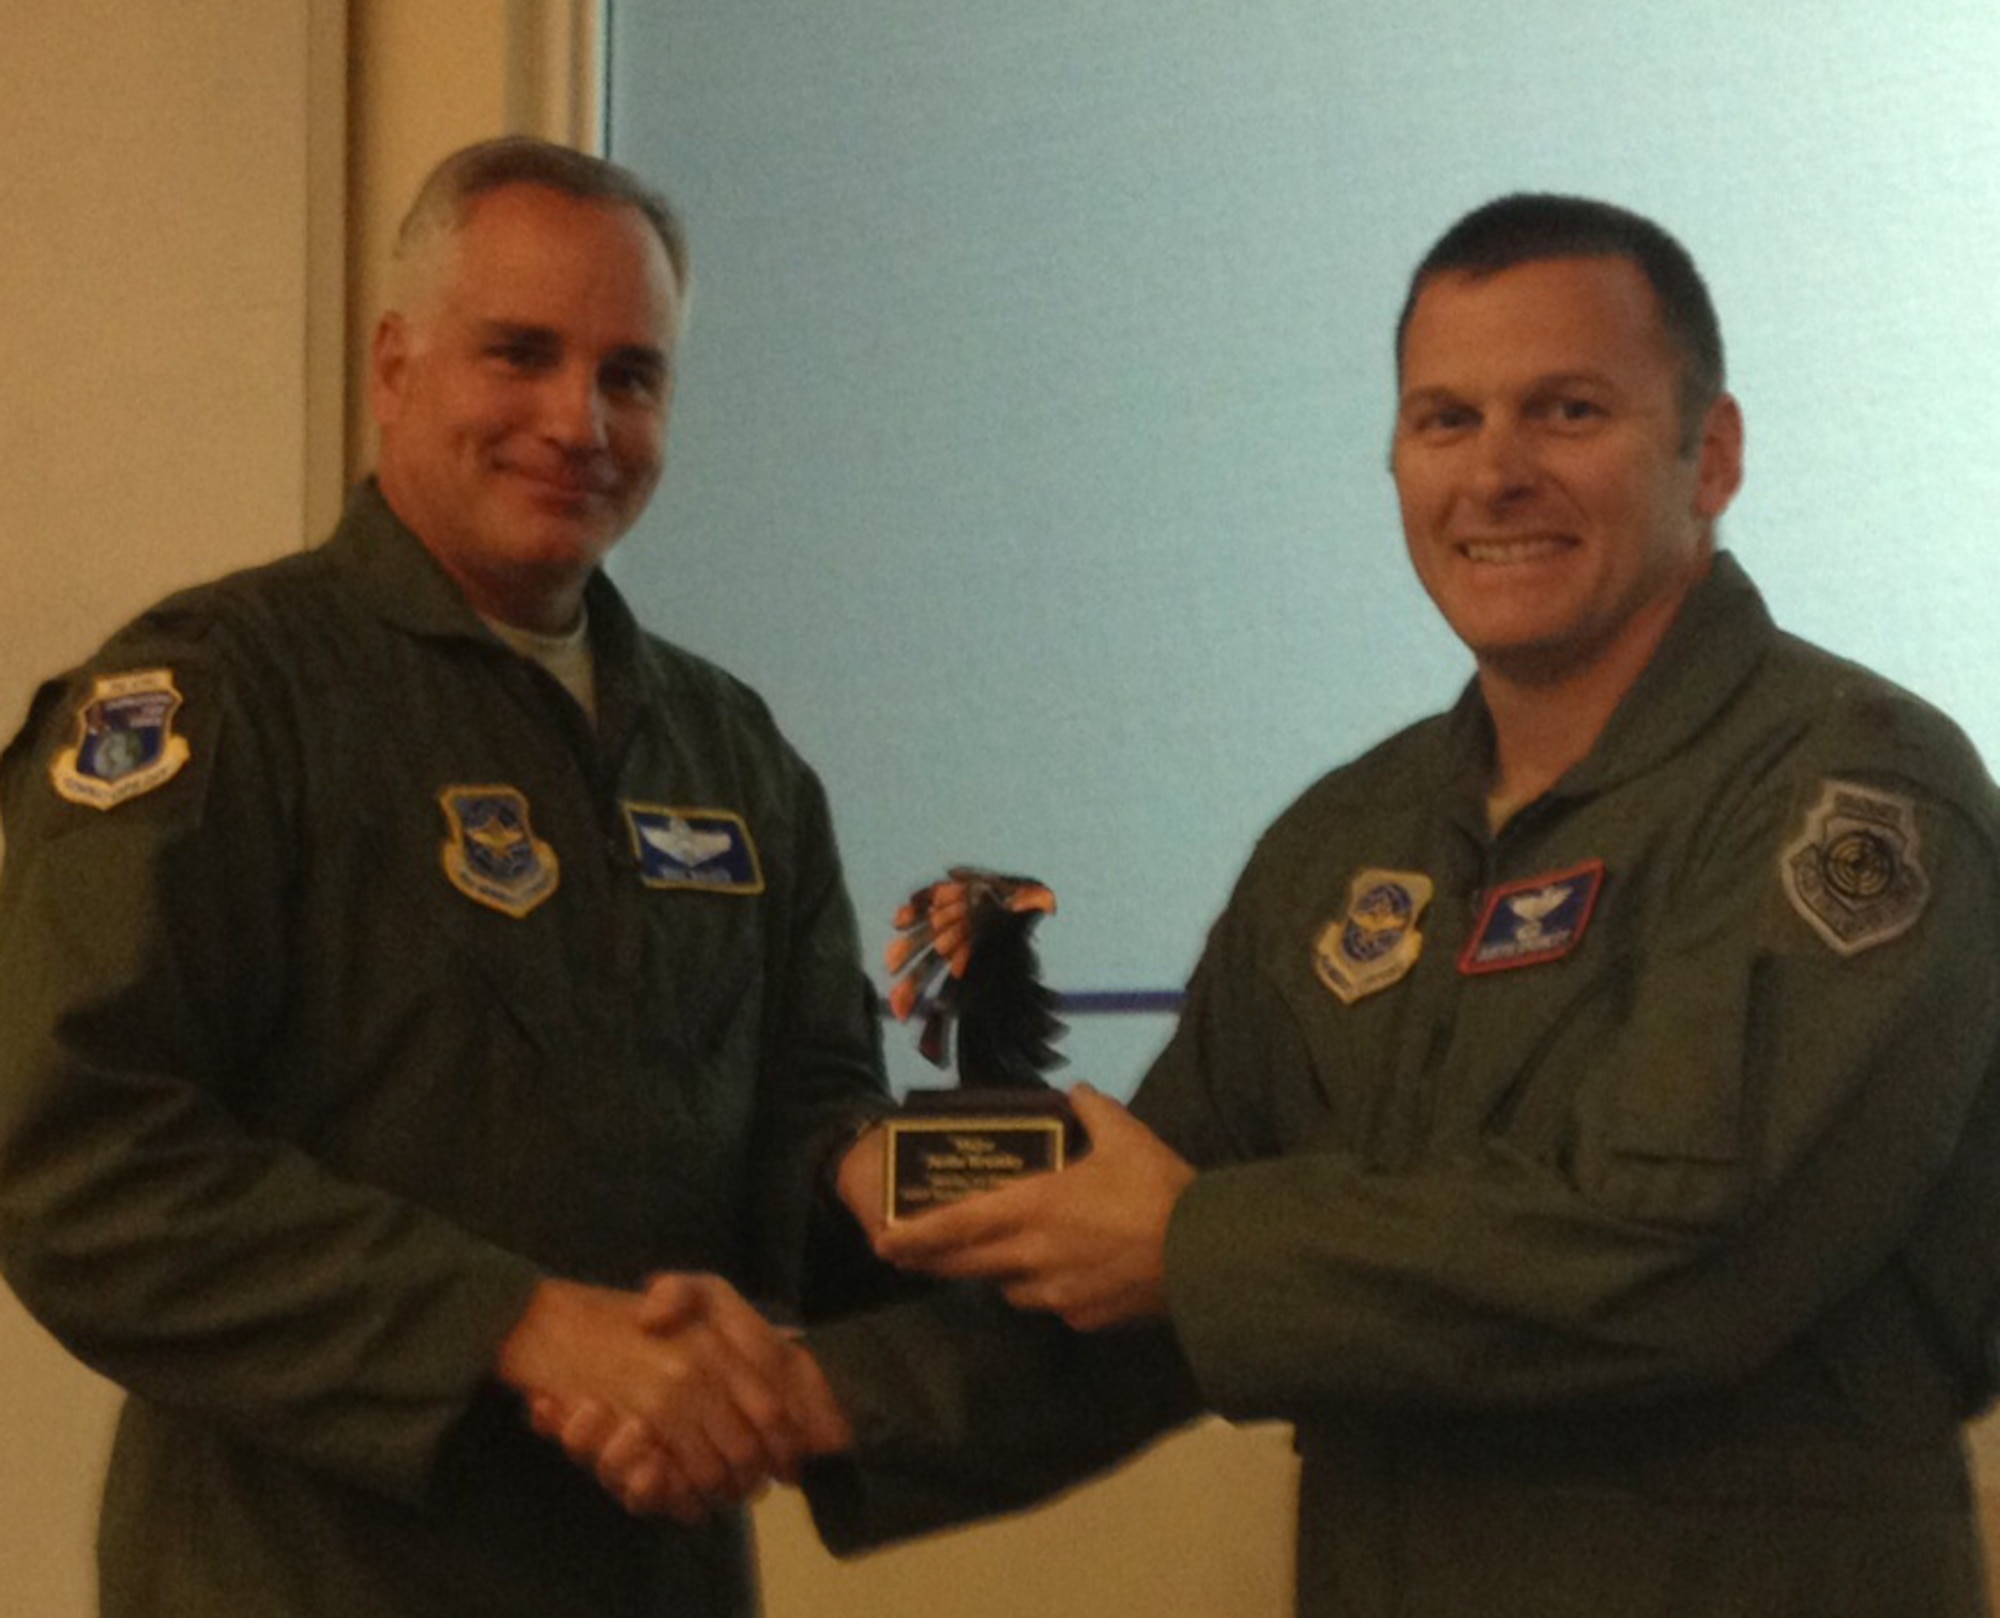 Col. Michael Bauer, Air Mobility Command combat operations division chief, presents Maj. Justin Brumley, 317th Airlift Group, the Mobility Air Forces 2011 Tactician of the Year award Nov. 8, 2012, at Rosecrans Air National Guard Base, Mo. Each year, MAF officials recognize tacticians for their outstanding capabilities during airdrop and air medical evacuation missions based on how well they were accomplished. Tech. Sgt. Ryan Crumrine, 317th AG, was also named MAF 2011 Tactician of the Year, but was unable to attend the ceremony due to a deployment.(Courtesy photo)